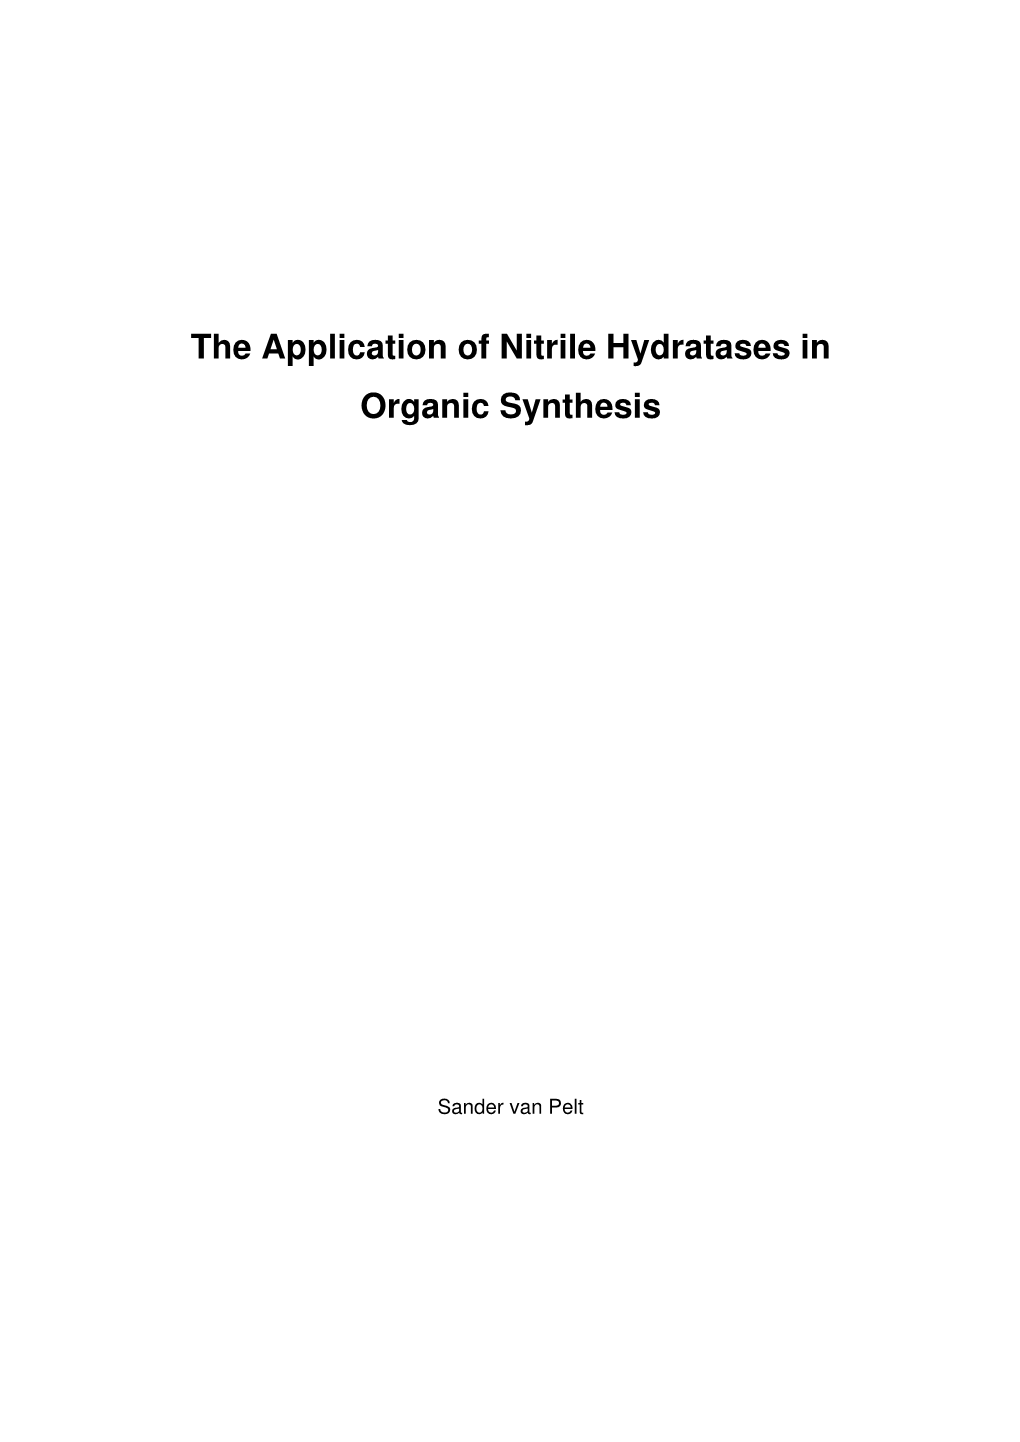 The Application of Nitrile Hydratases in Organic Synthesis